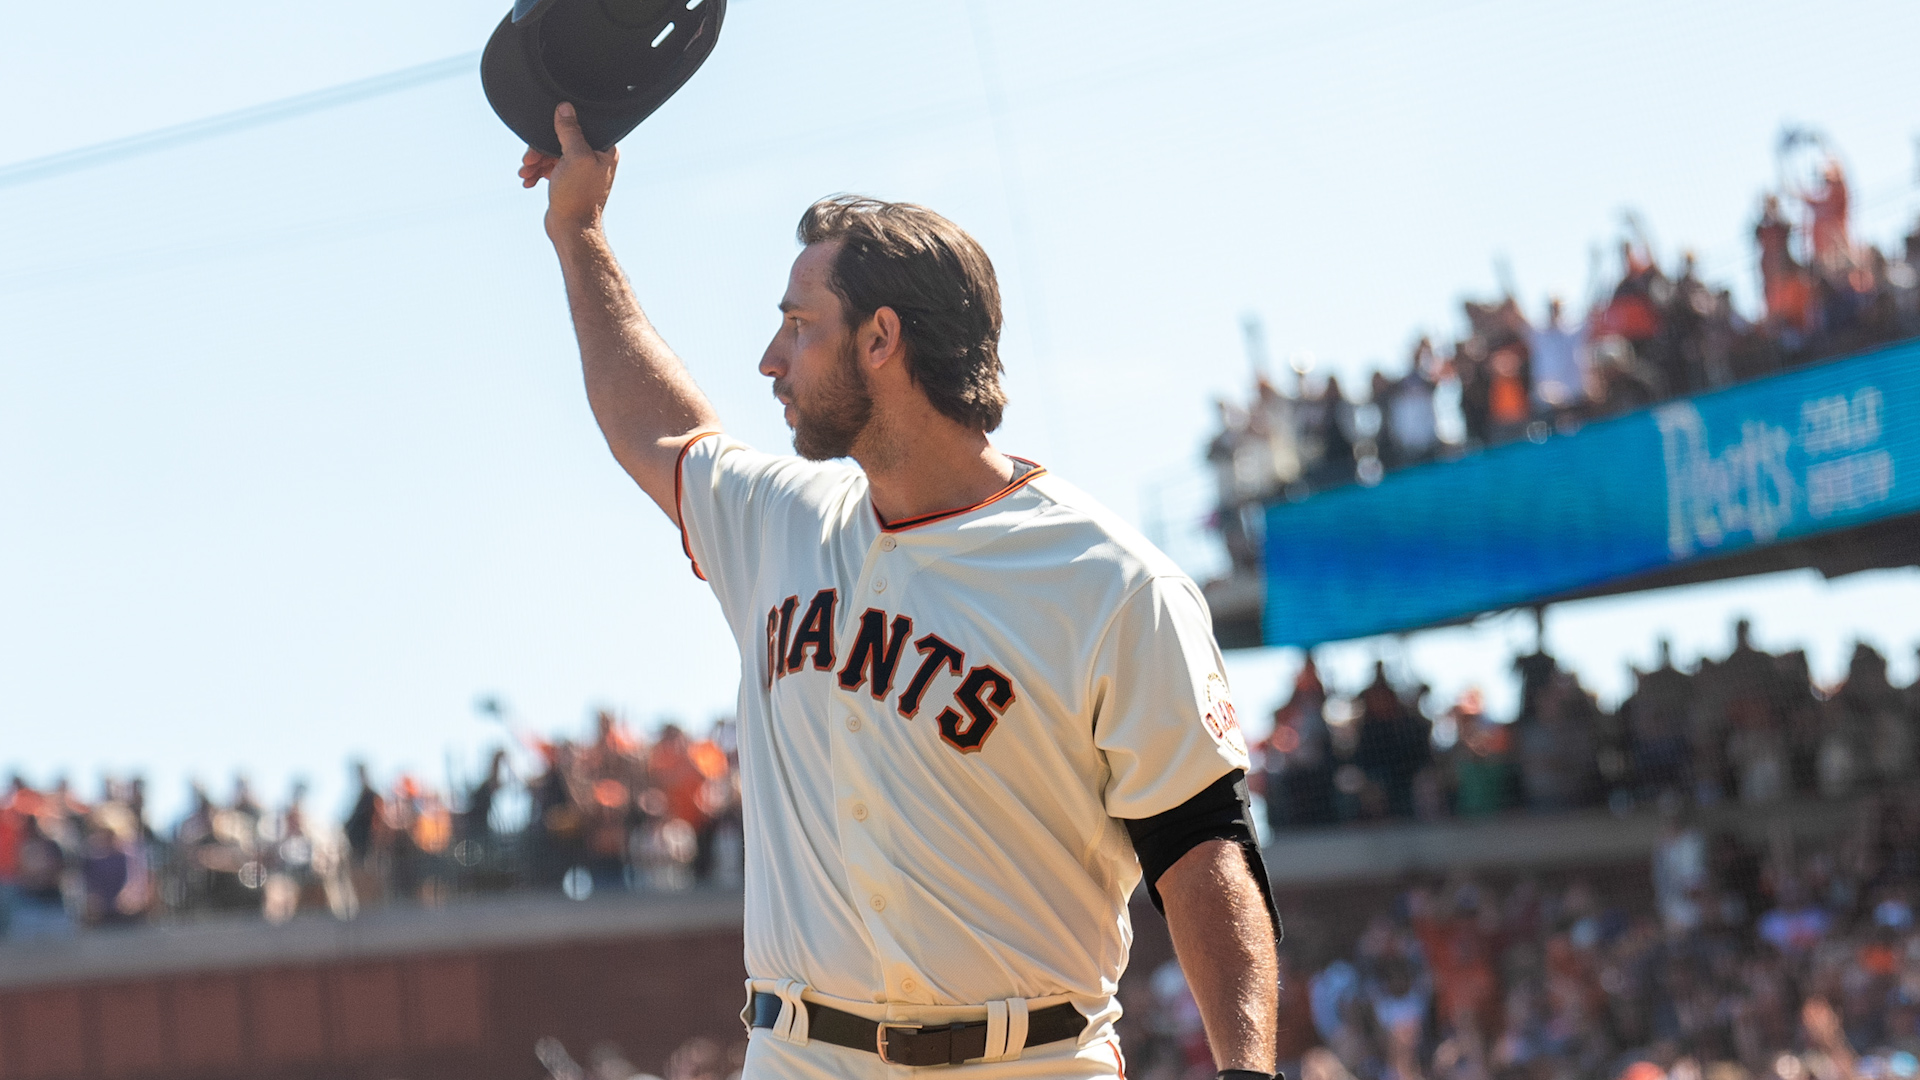 Madison Bumgarner's dirt-bike accident will keep him out through the  All-Star break